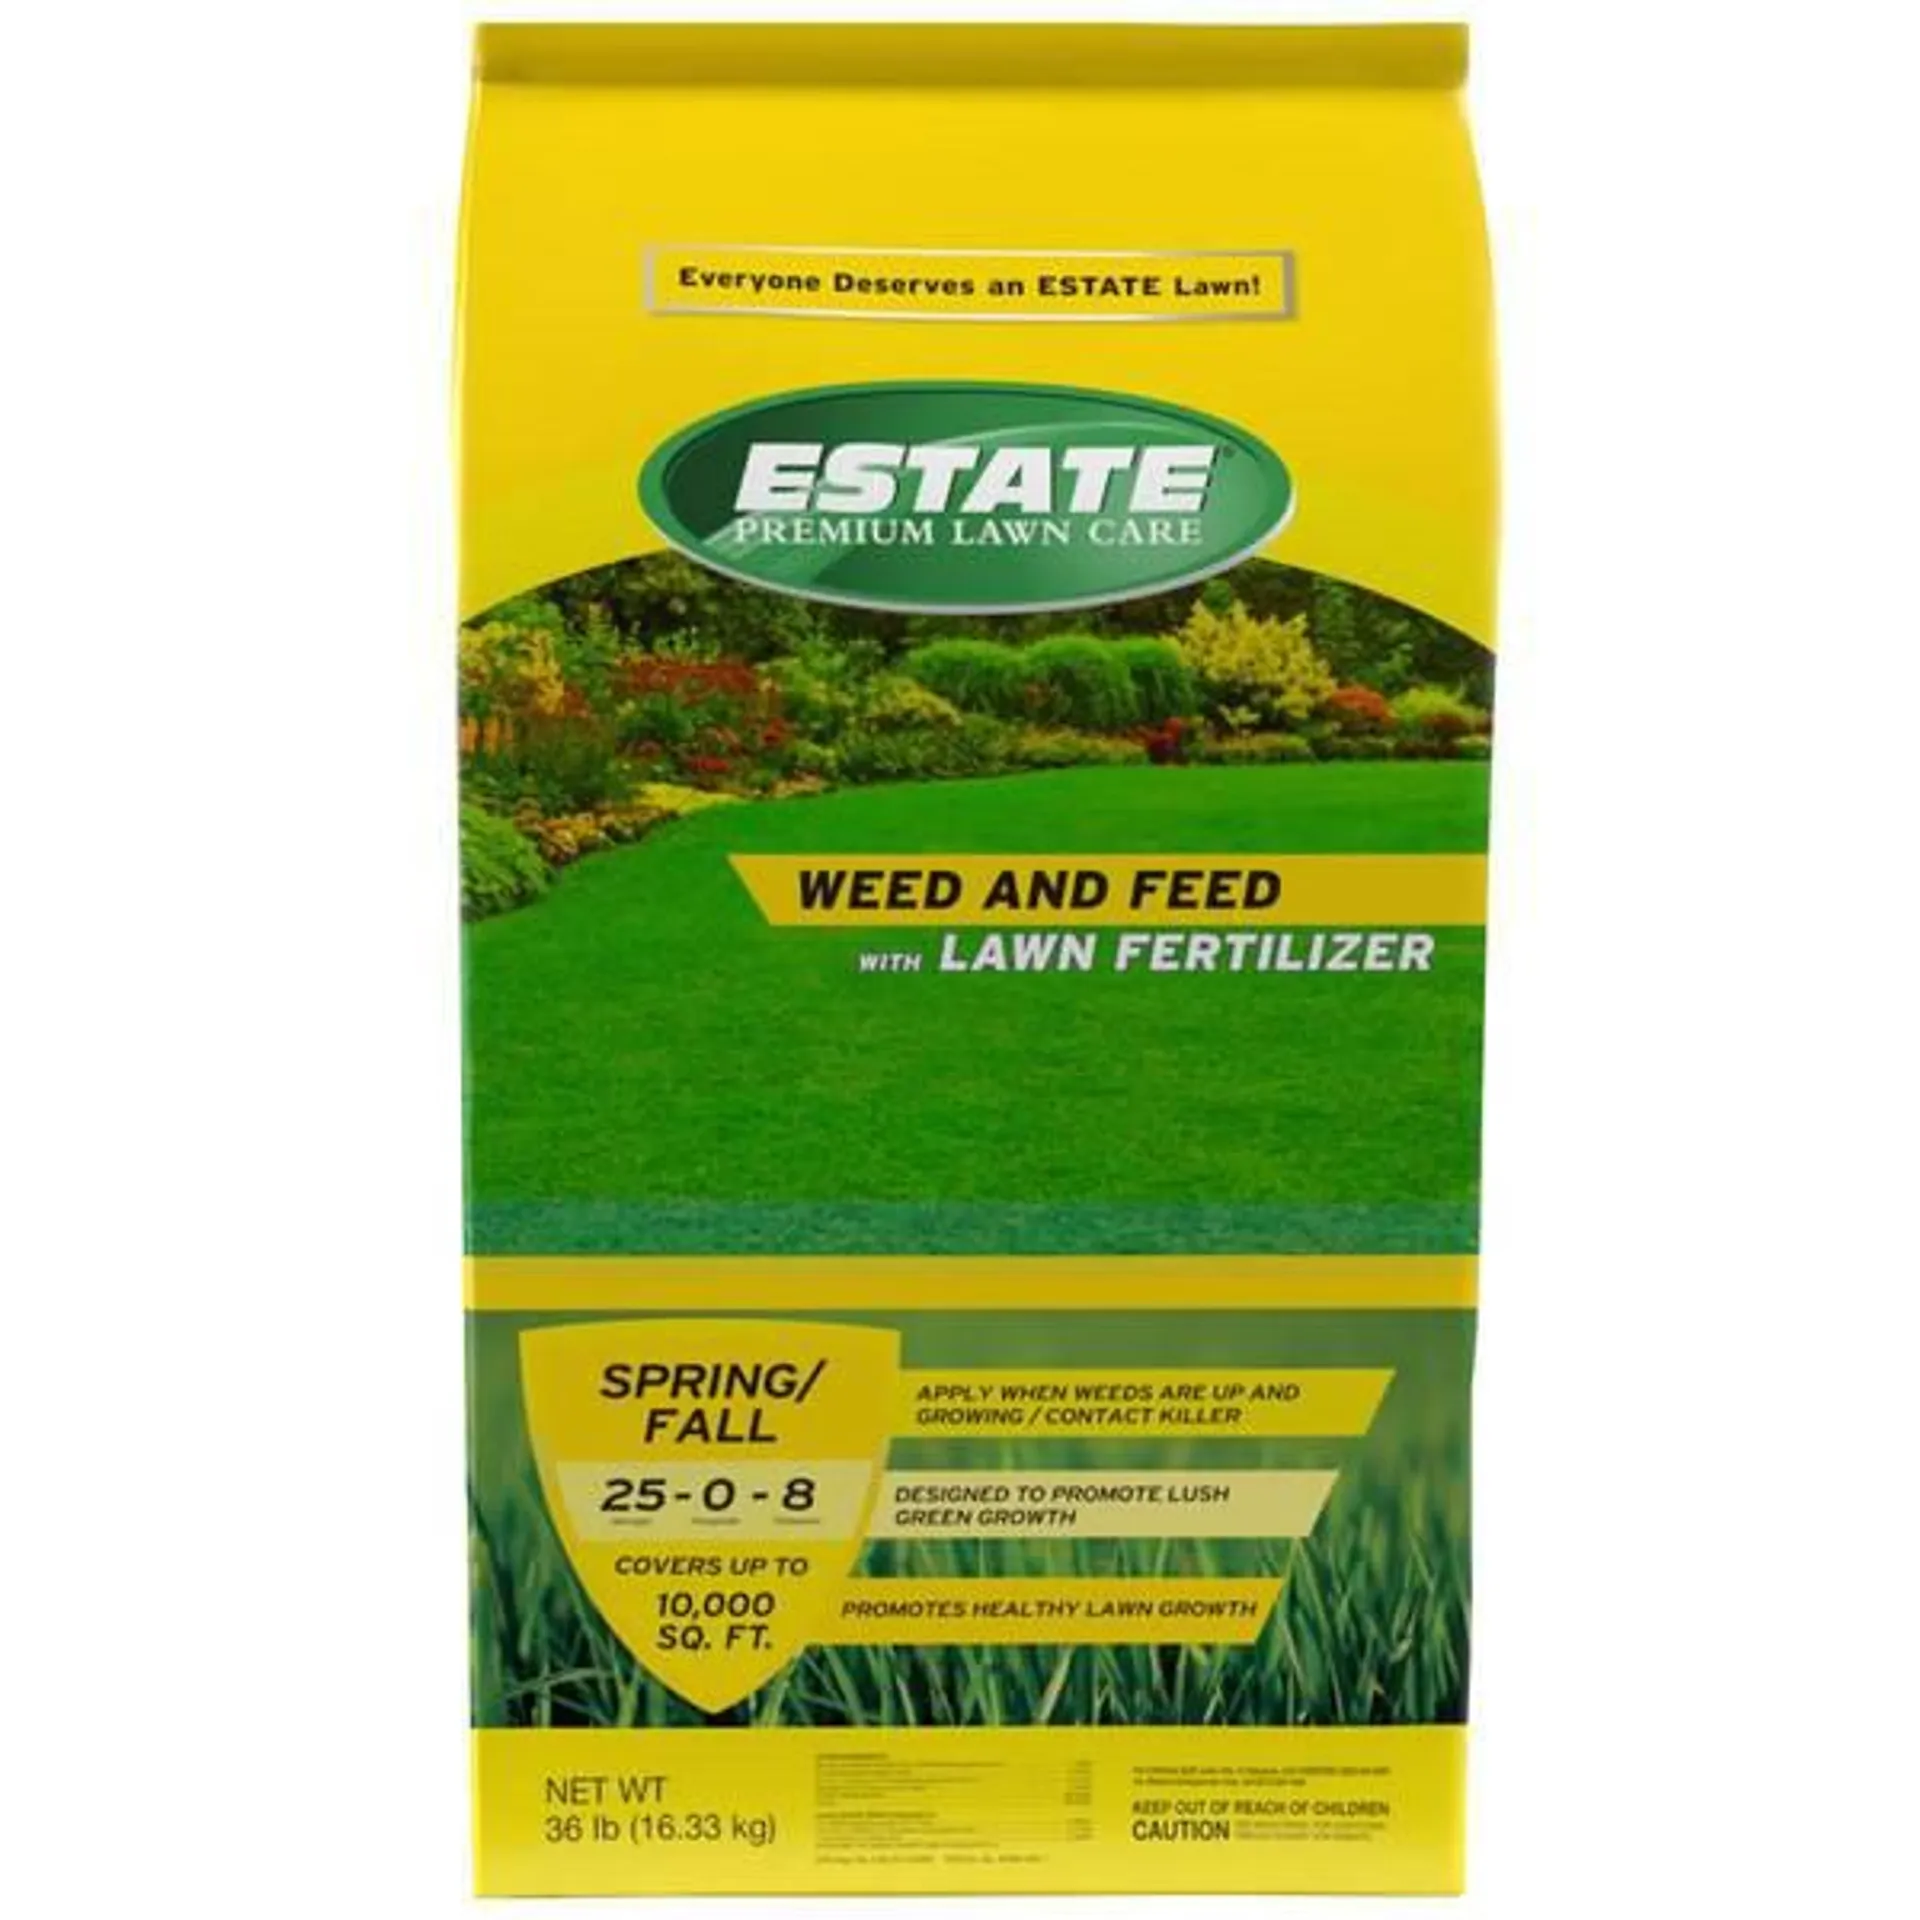 10,000 sq. ft 36 lb Weed and Feed with Lawn Fertilizer